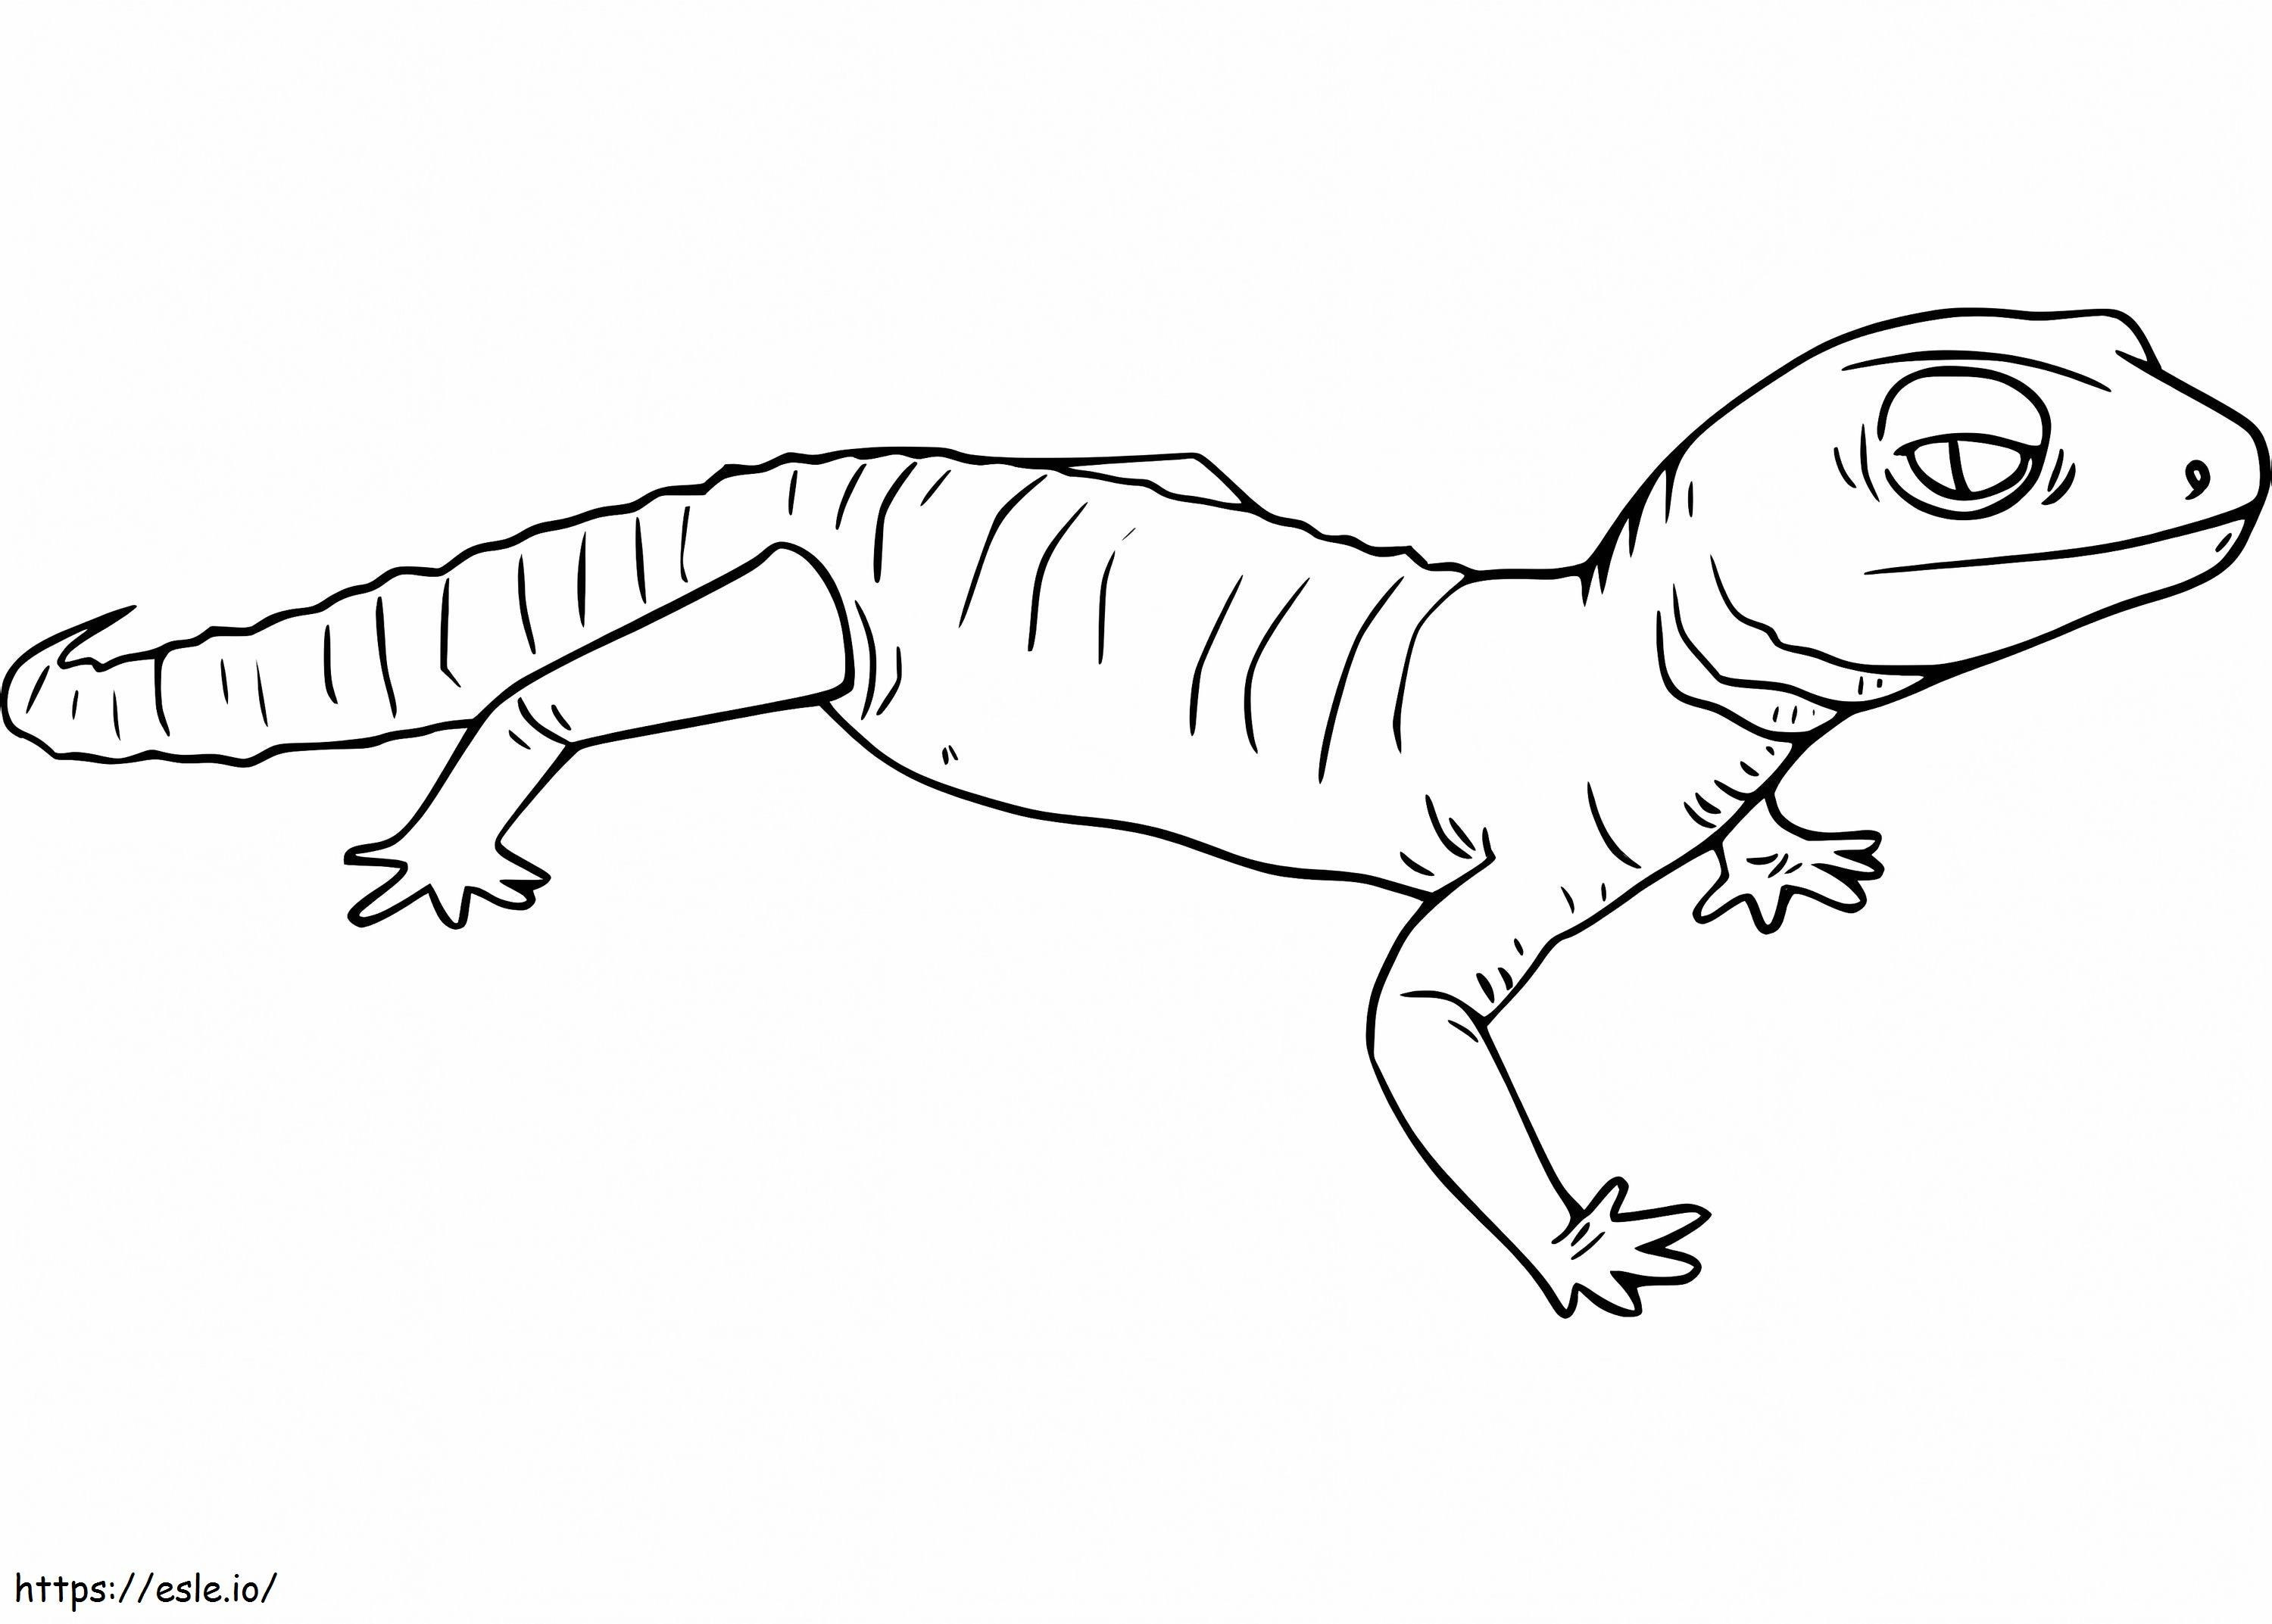 A Gecko coloring page